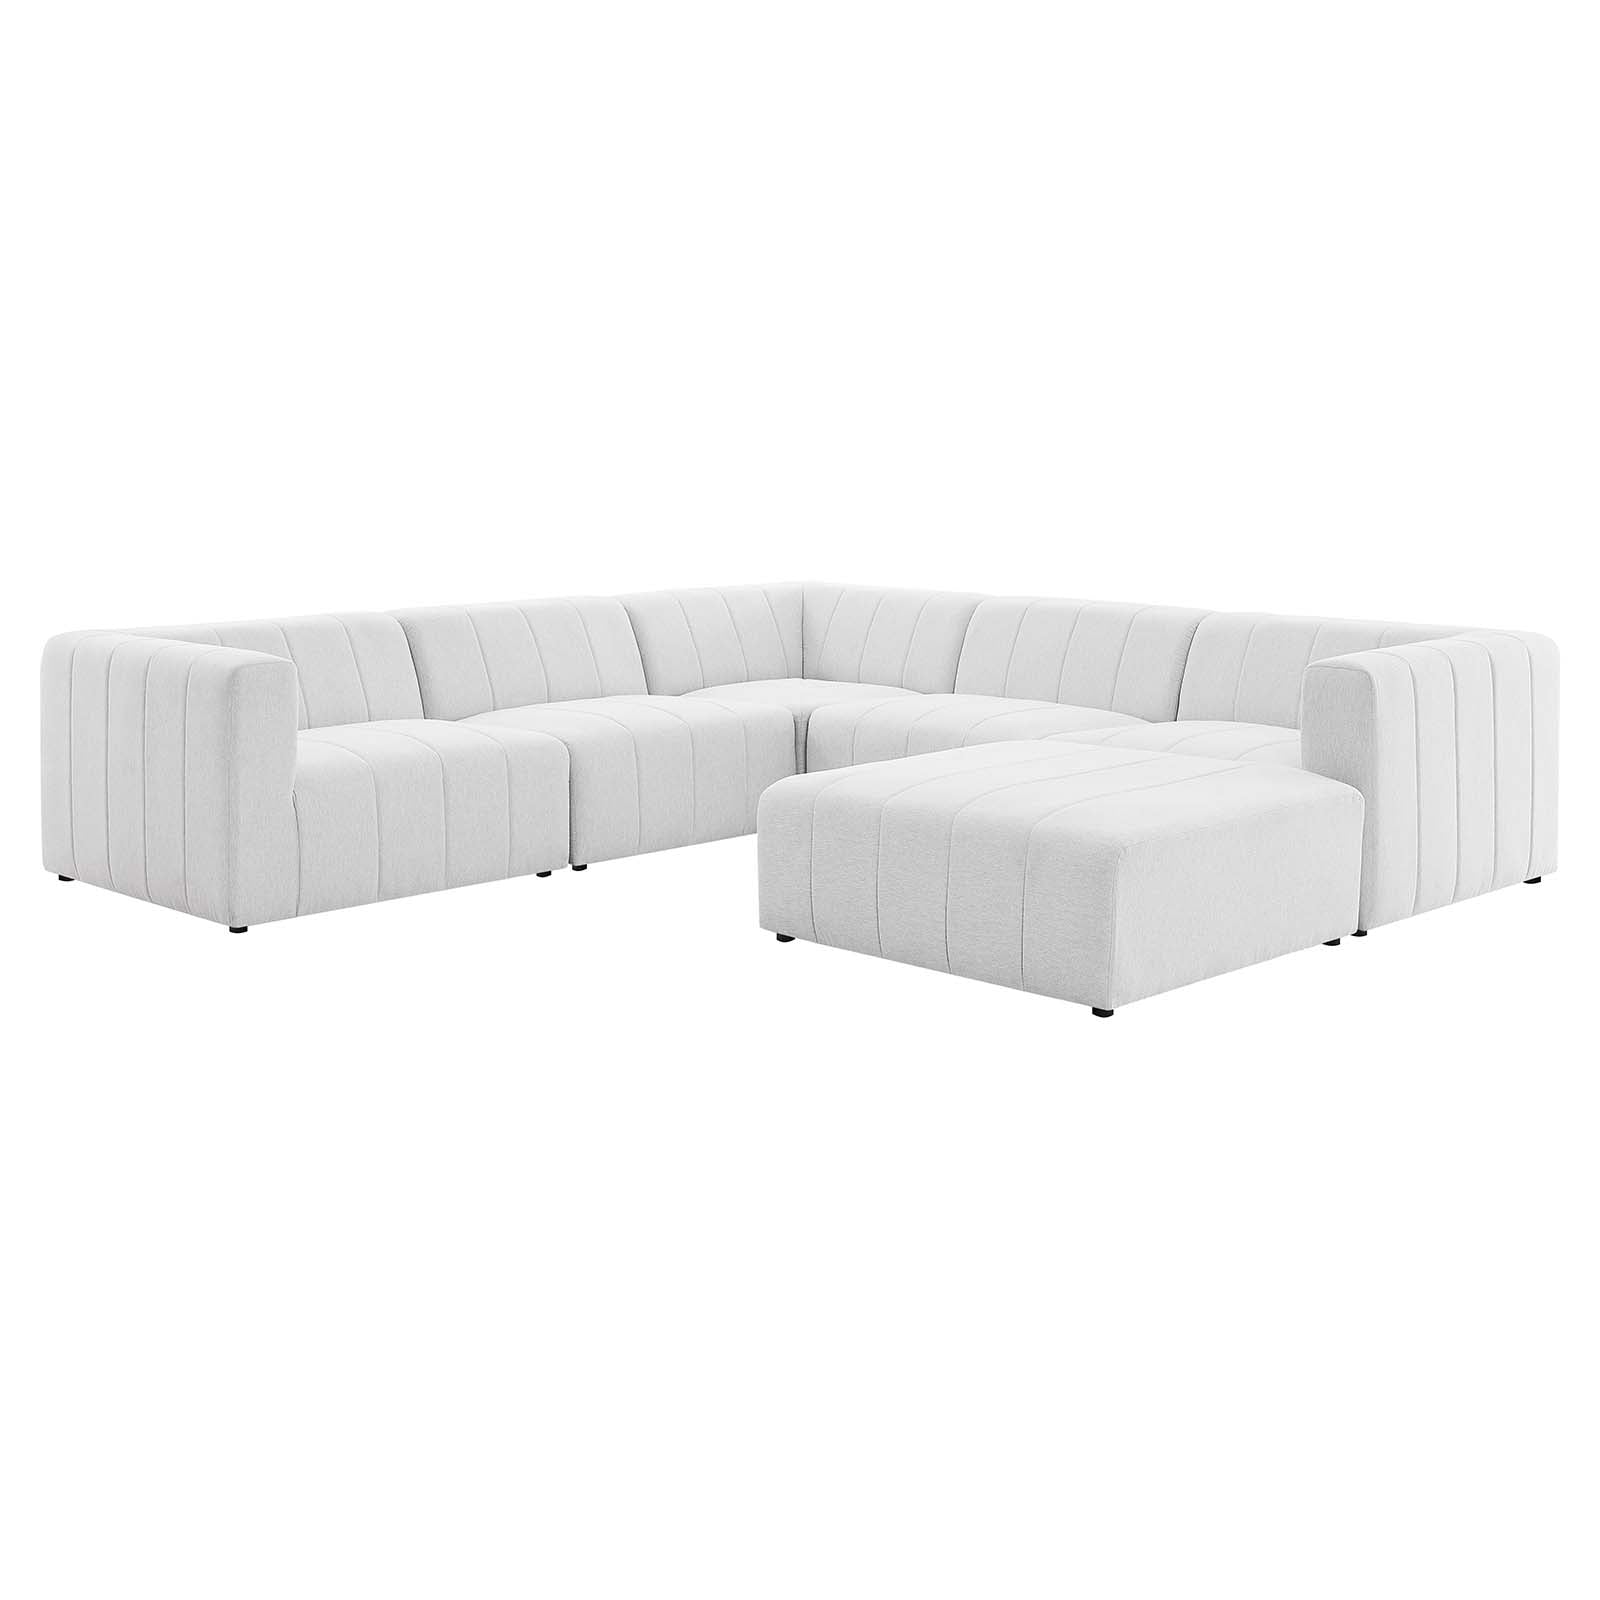 Modway Sectional Sofas - Bartlett Upholstered Fabric 6-Piece Sectional Sofa Ivory